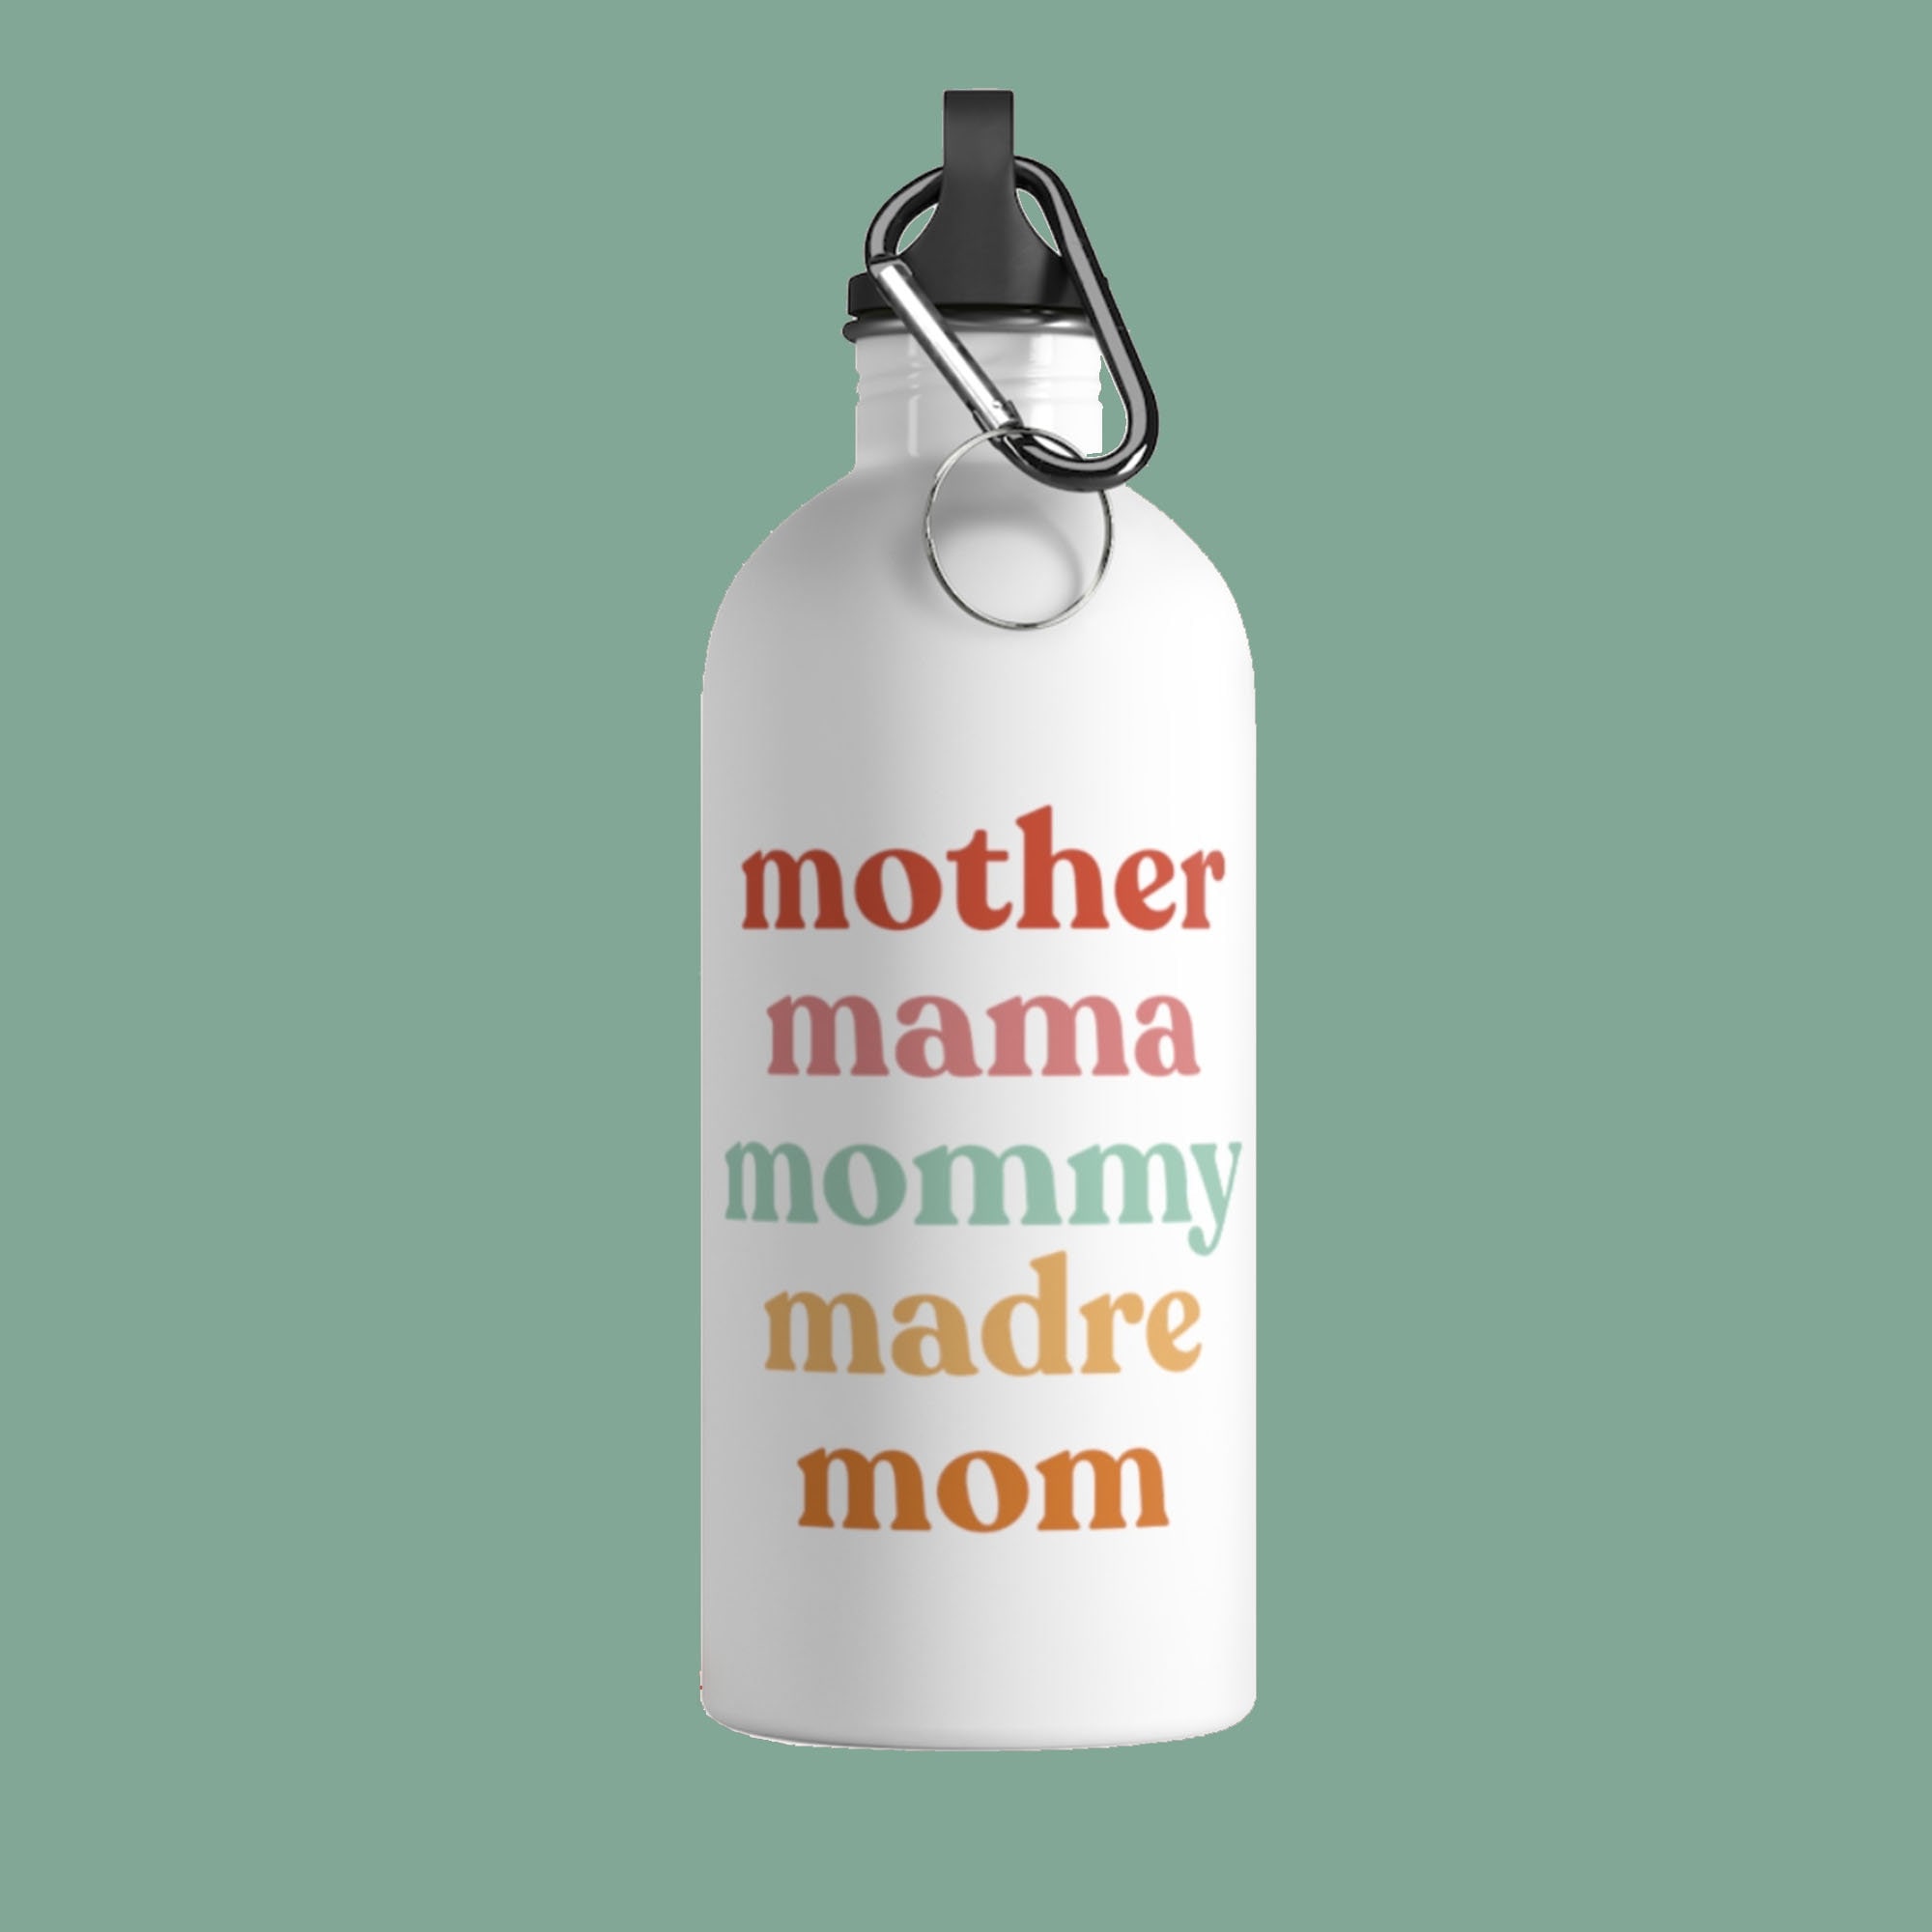 Mother Mama Mommy Madre Mom Stainless Steel Water Bottle Mothers Day Gifts  From Daughter Son Dad for Mom Birthday Present Gift New Mom 